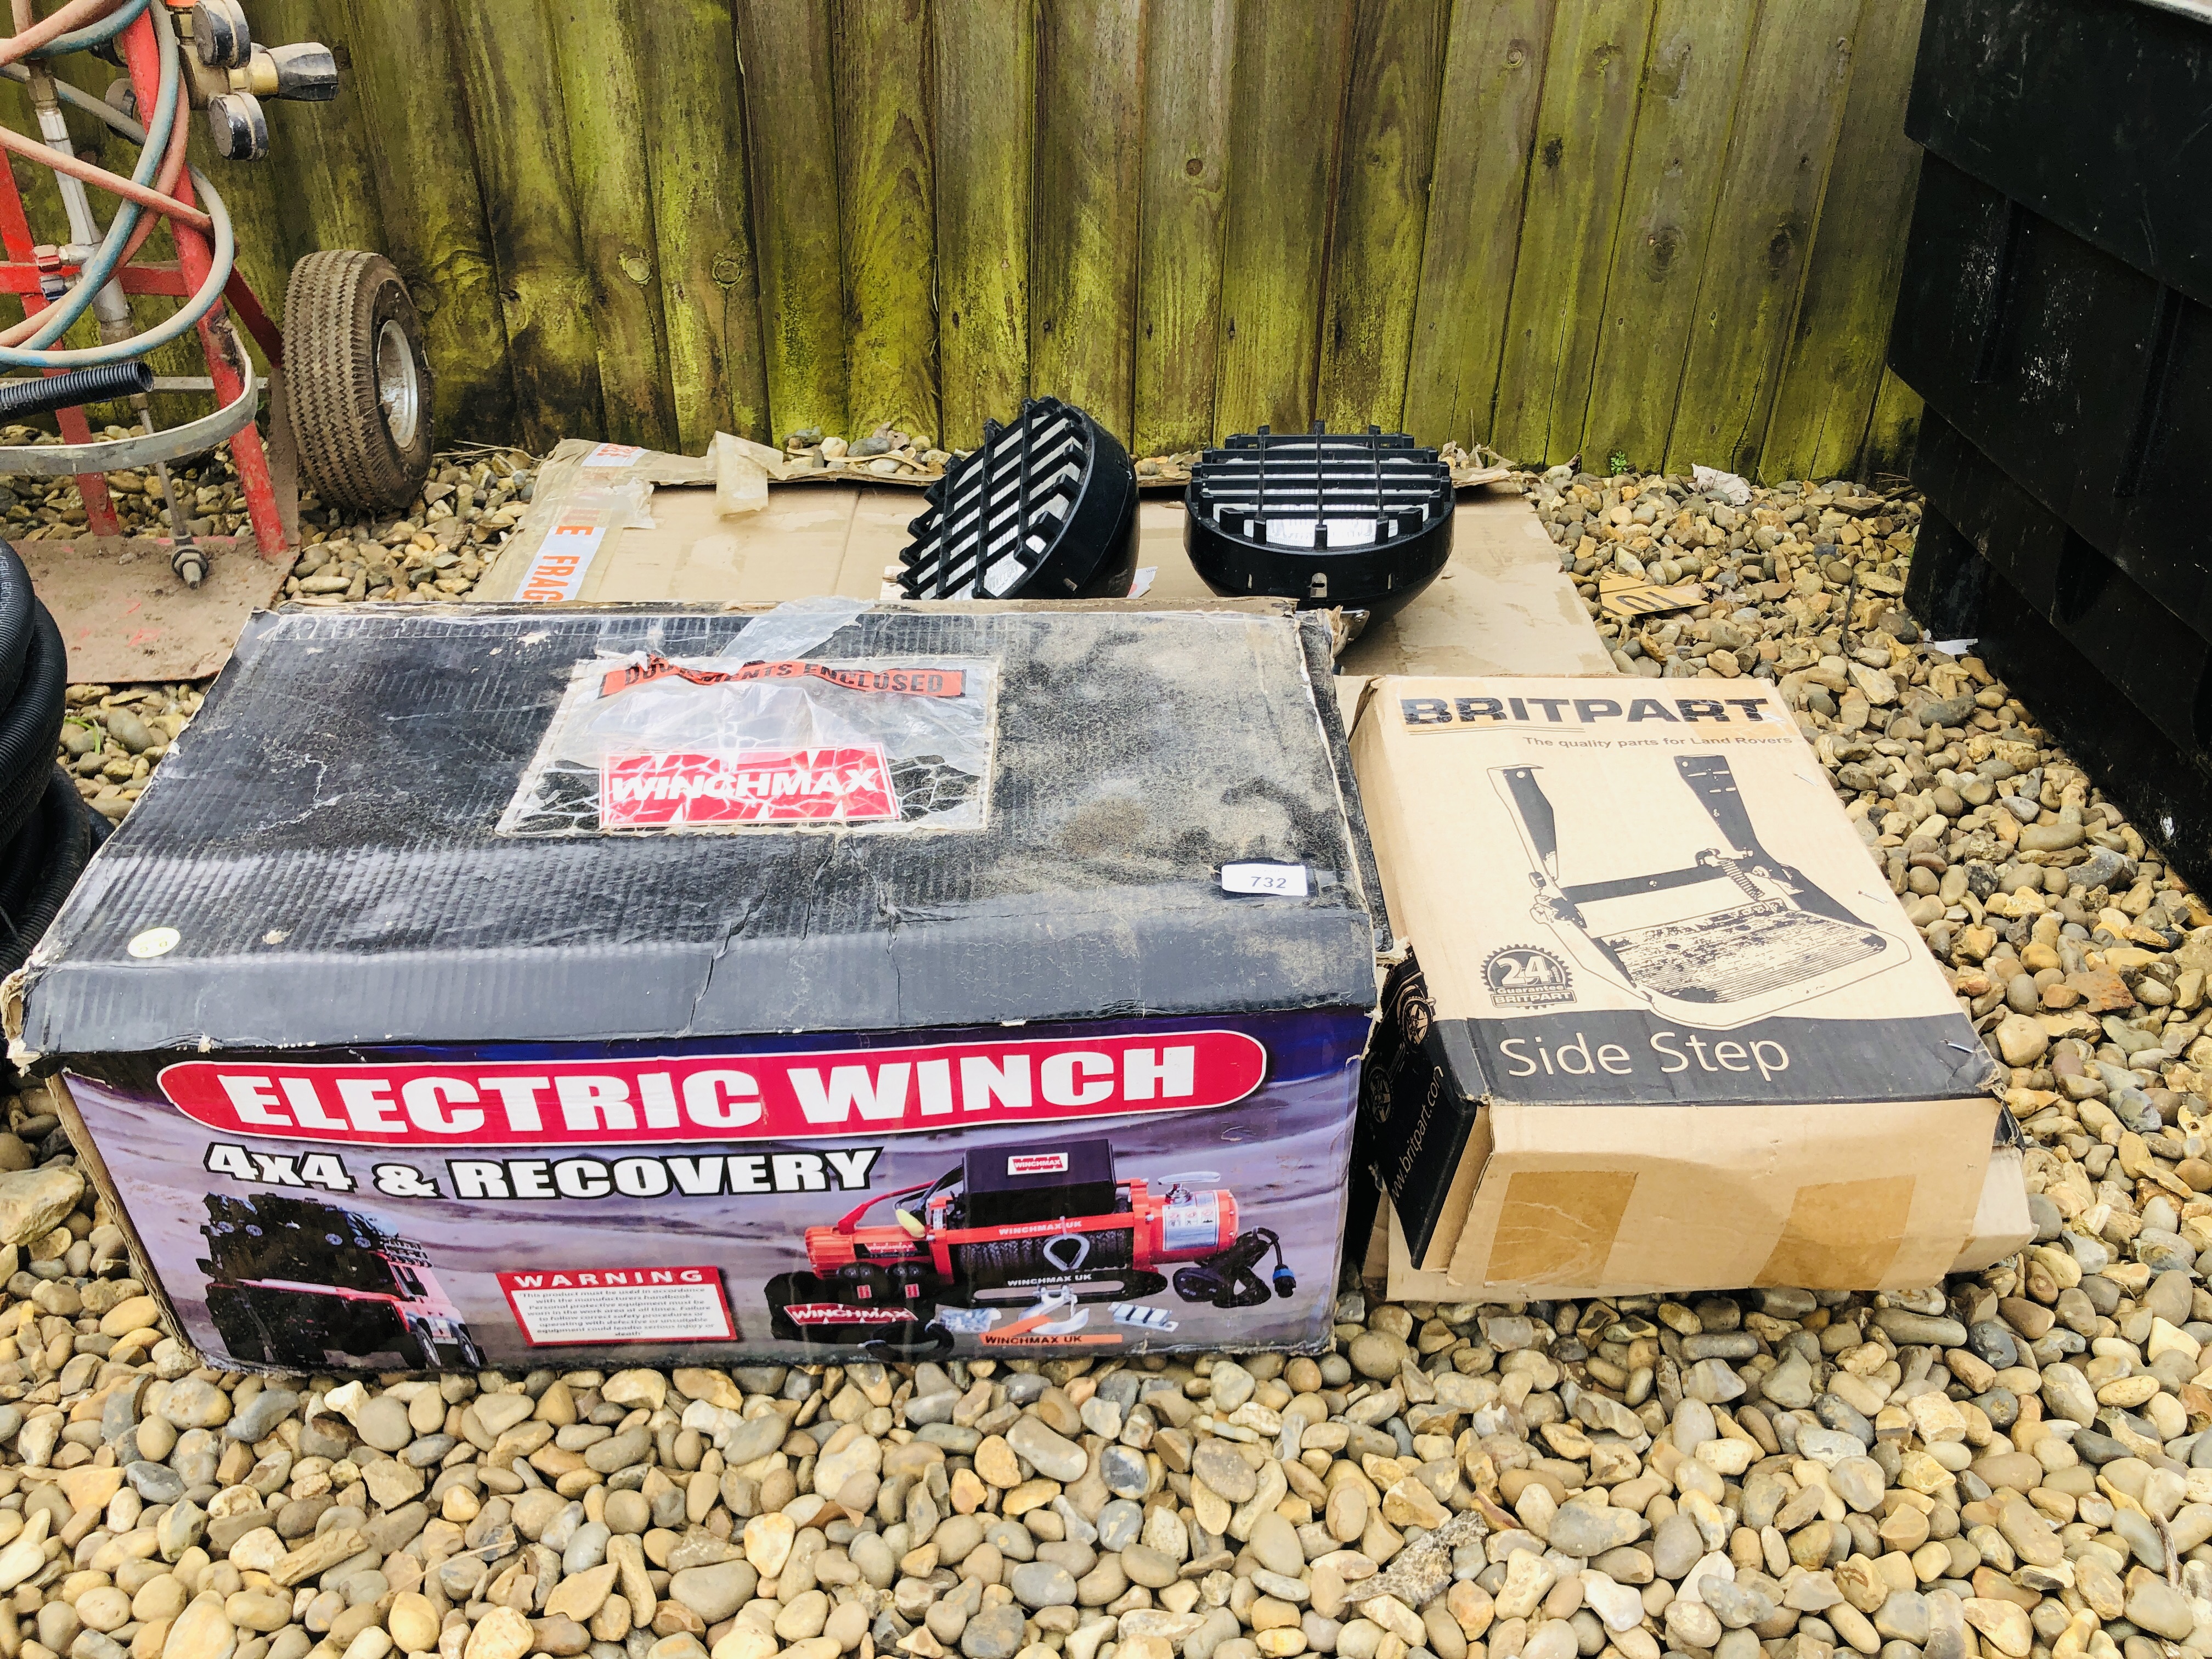 AN ELECTRIC 4 X 4 WINCH USED - A/F CONDITION, BOXED BRITPART LANDROVER SIDE STEP,